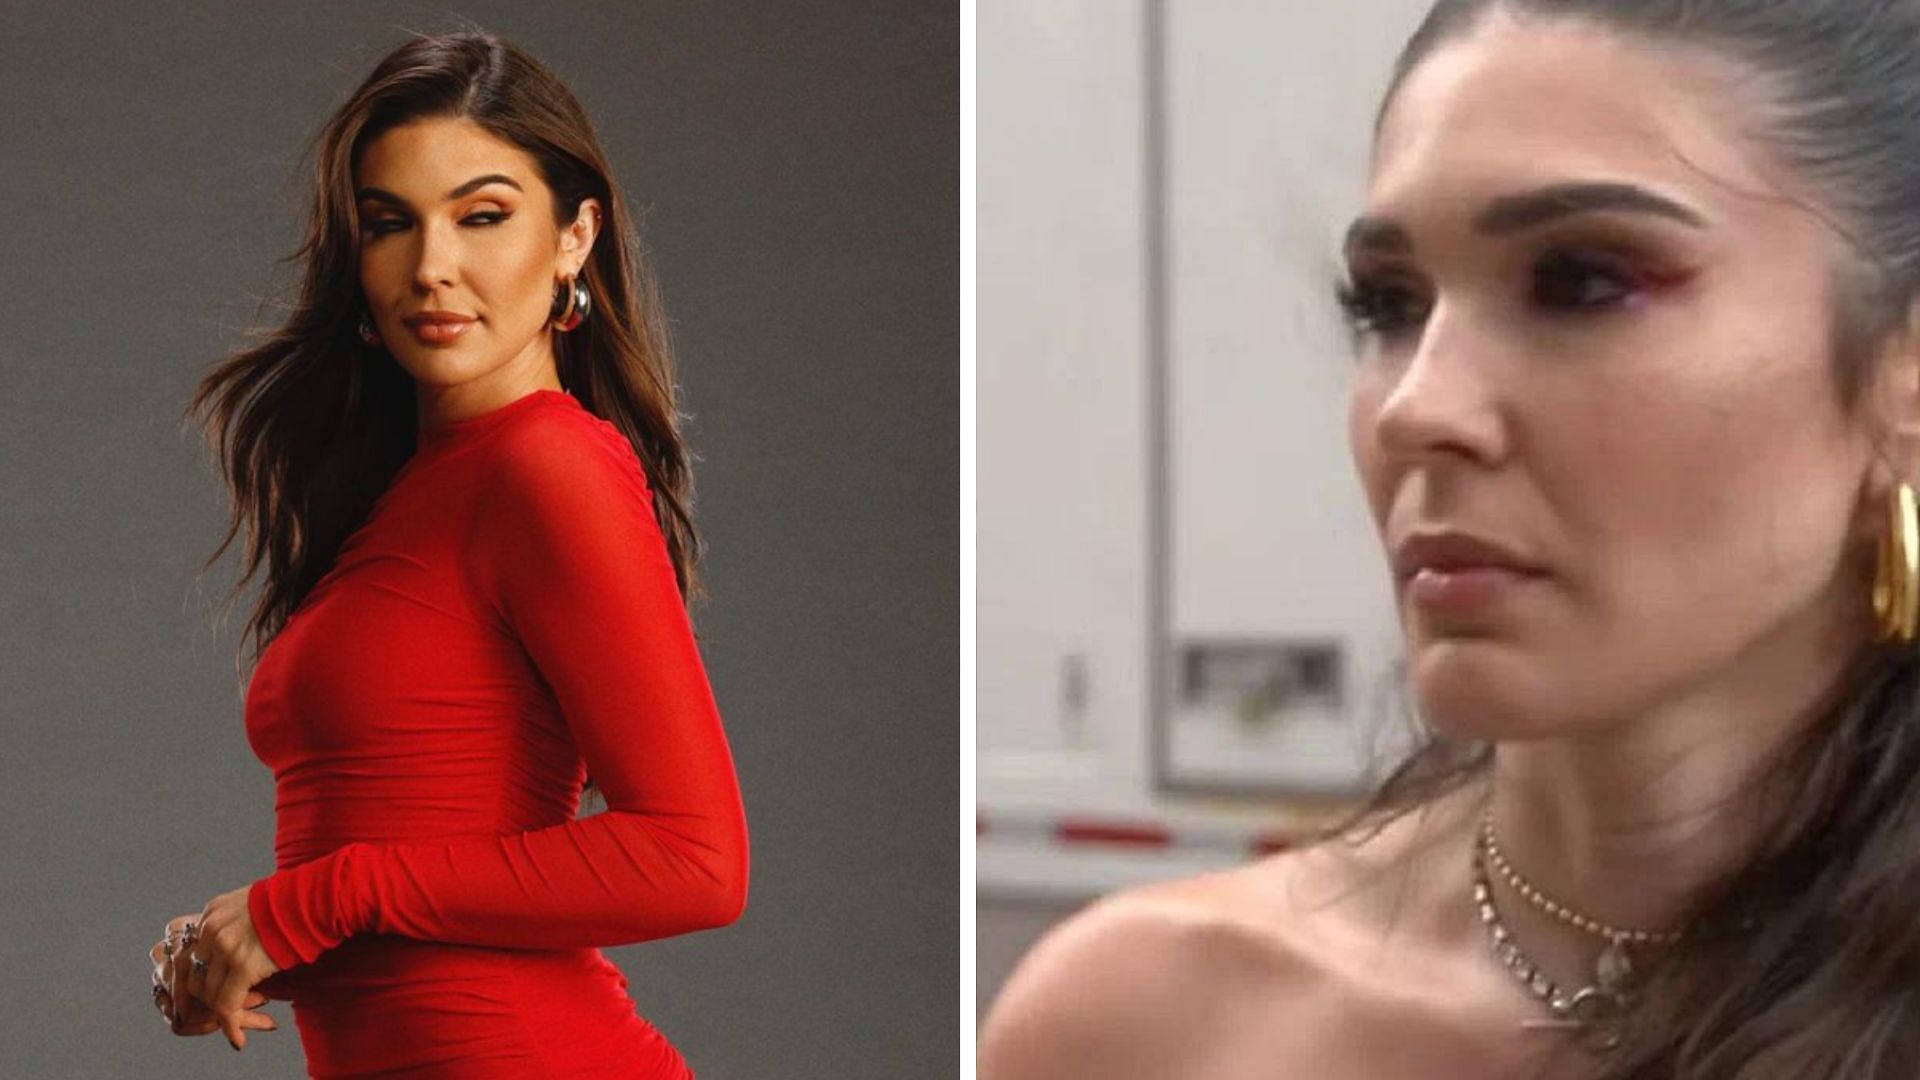 Cathy Kelley is a WWE backstage interviewer